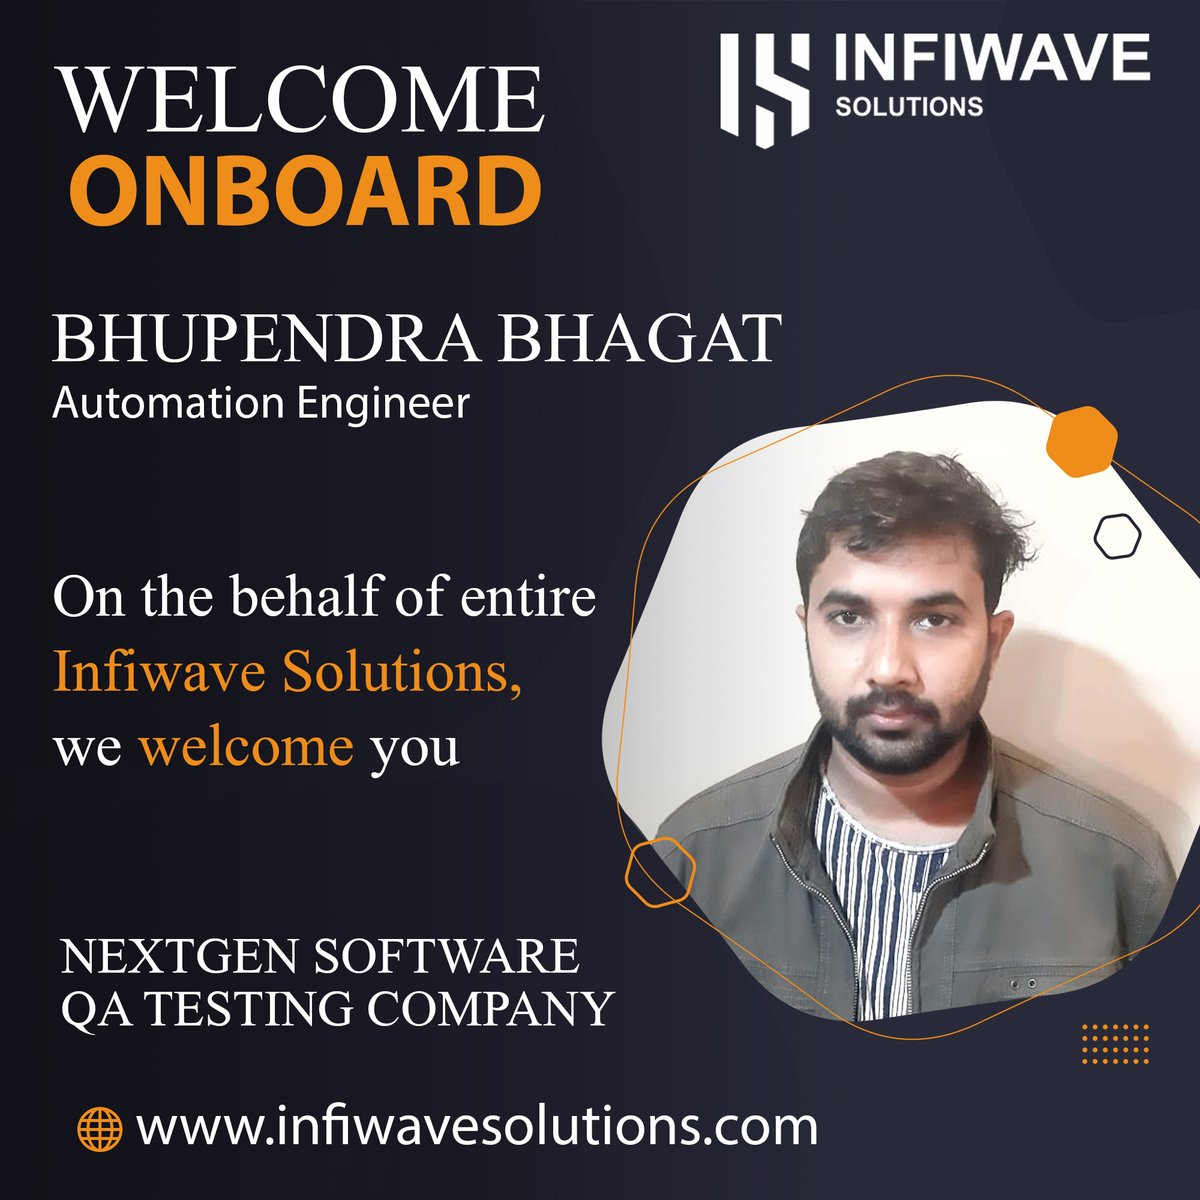 It is always an exciting time when we add a new Team member. We are happy to announce that Mr Bhupendra B. has joined us.

Bhupendra has a vast experience in Healthcare and he has joined as a Automation Engineer   #softwaretestestingcompany  #QAcompany #QAservices #QAsolutions